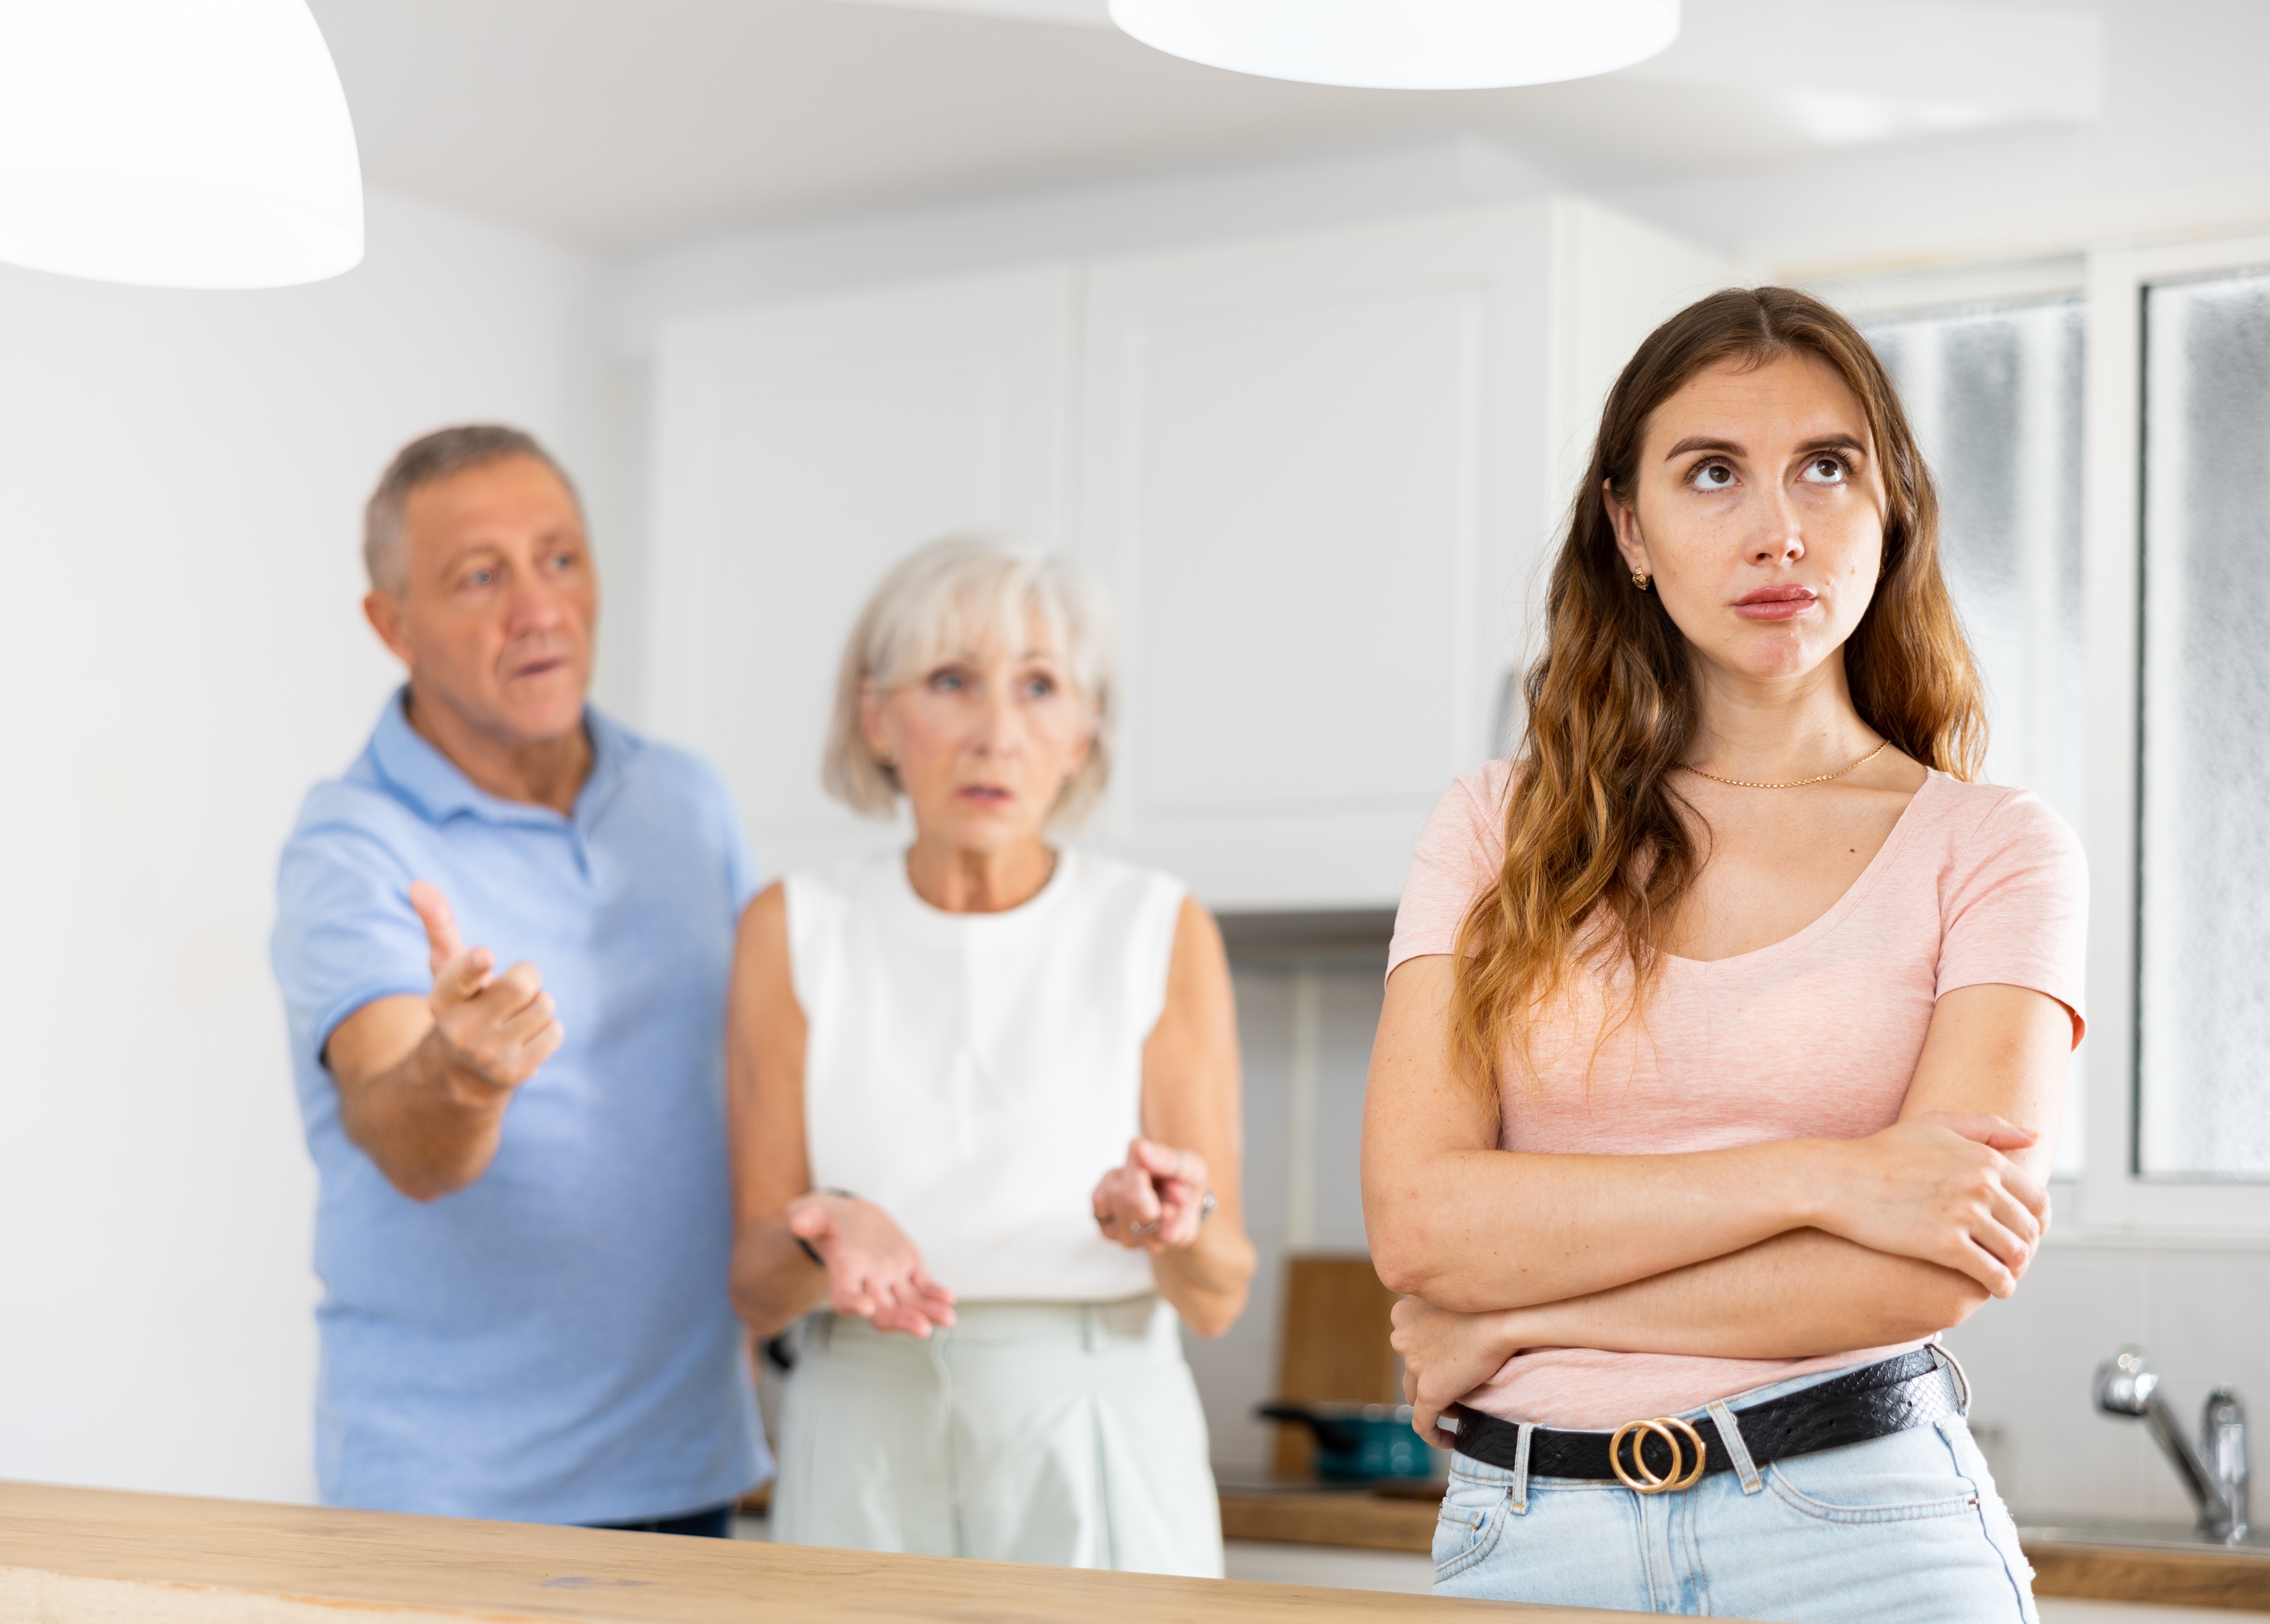 Parents lecturing their adult daughter at home | Source: Shutterstock